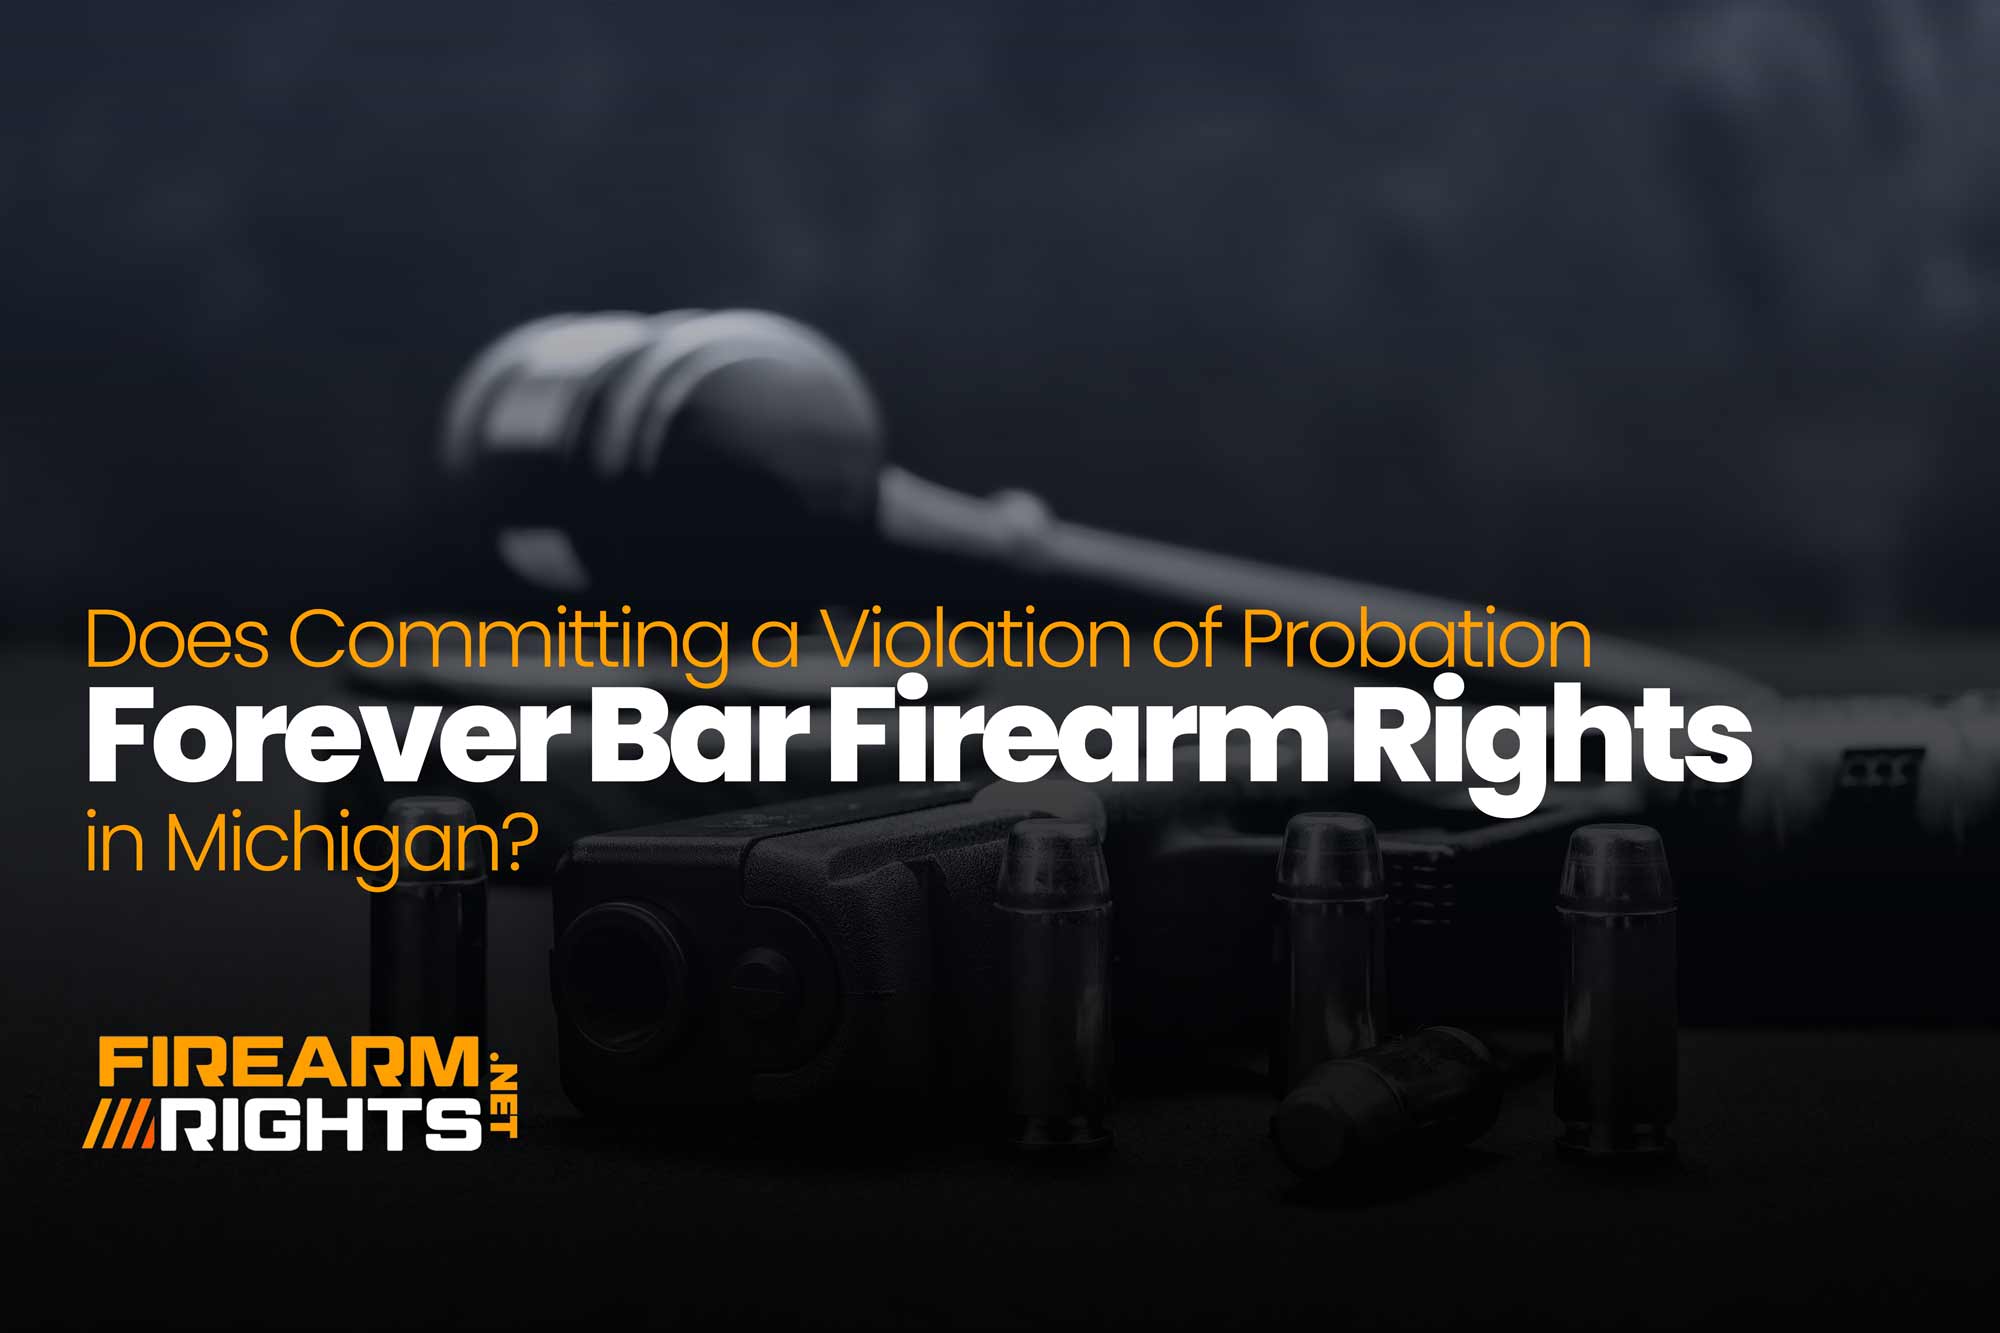 Does Committing A Violation of Probation Forever Bar Firearm Rights in Michigan?